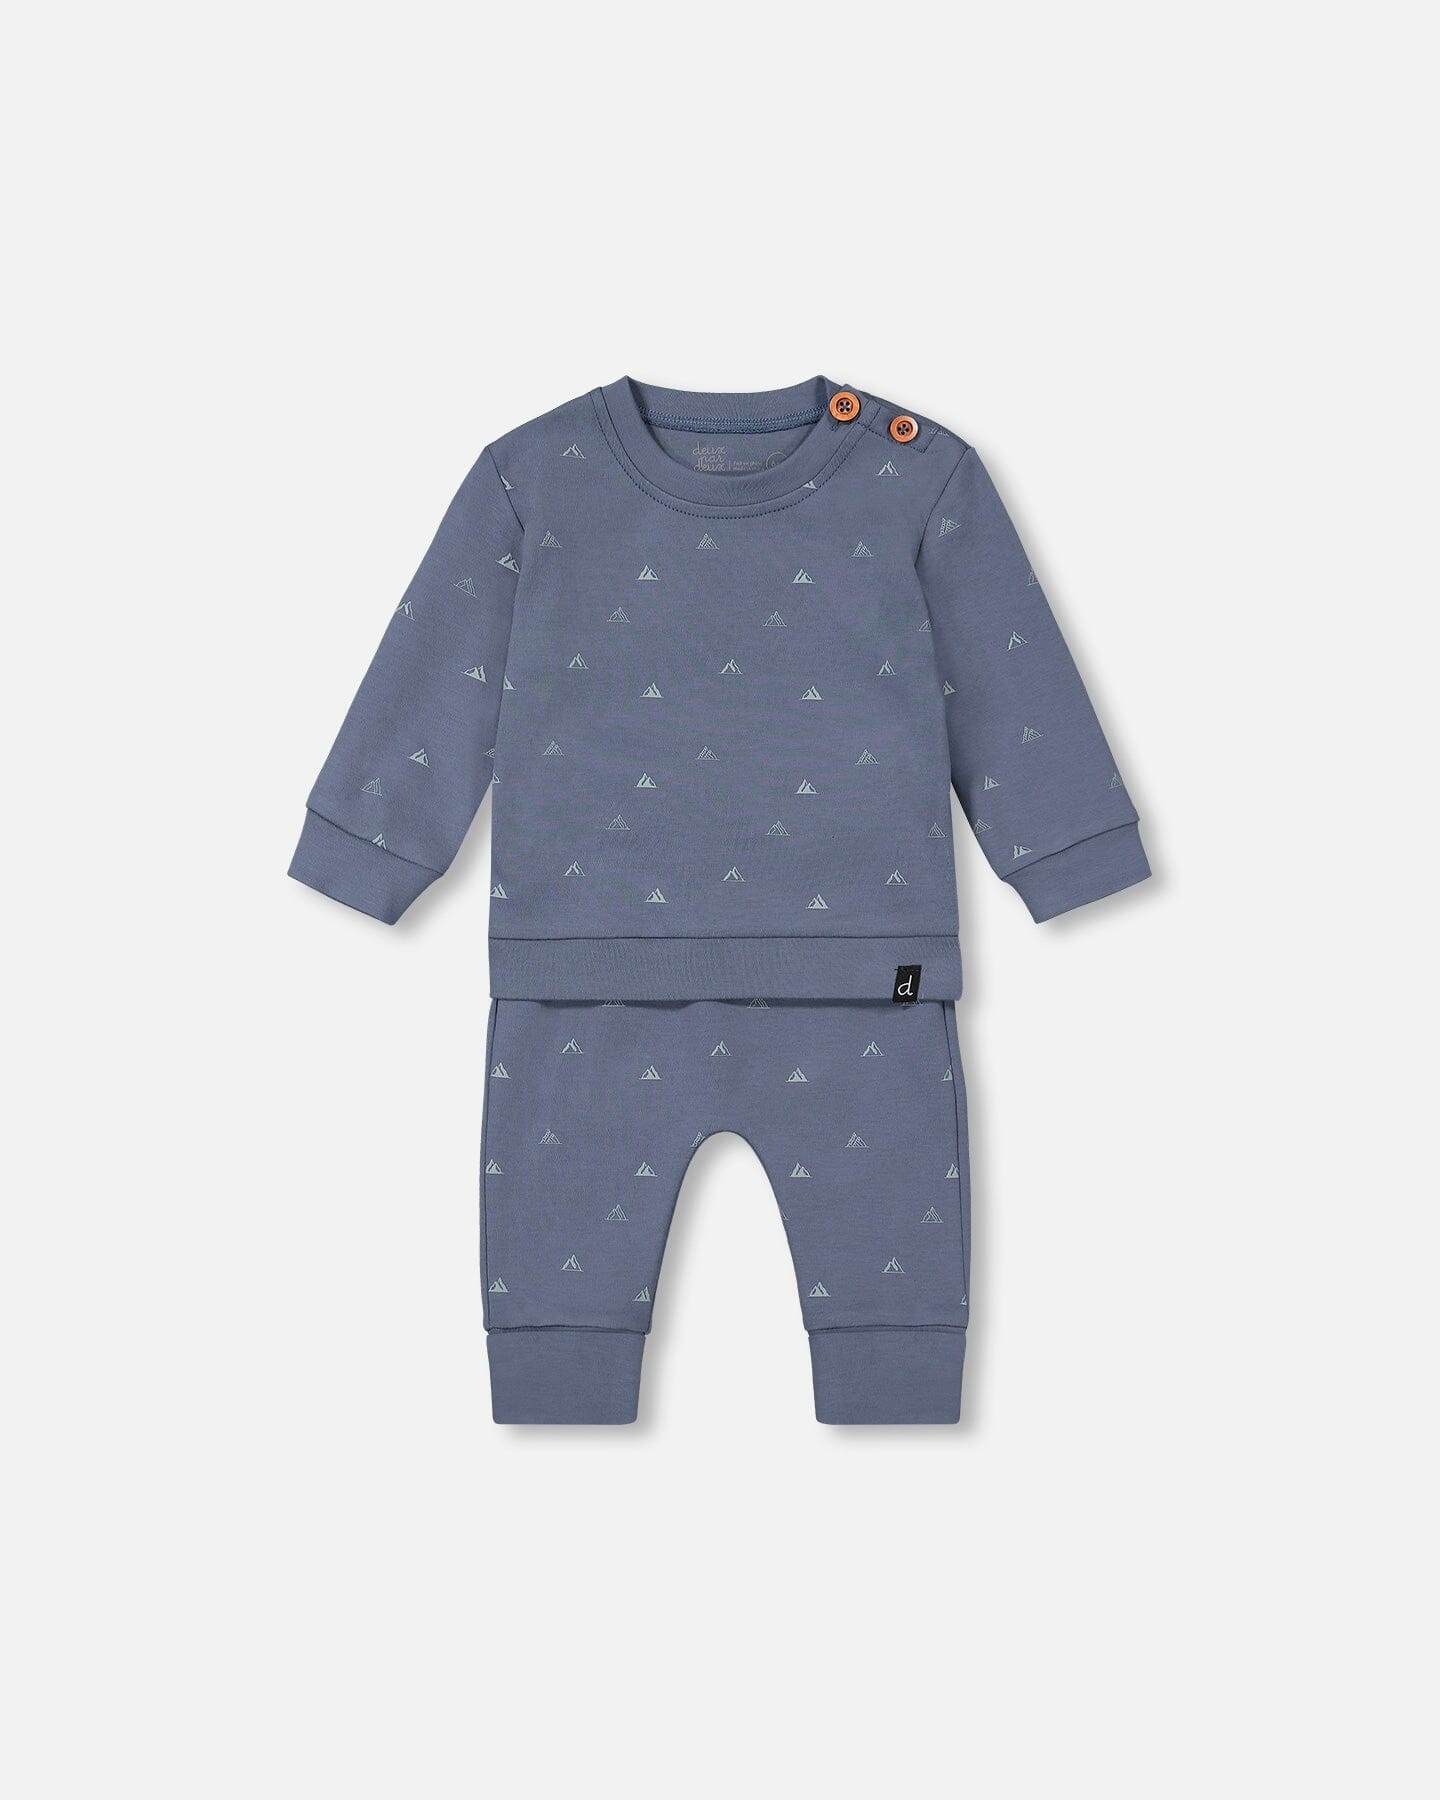 Organic Cotton Printed Top And Grow-With-Me Pants Set French Navy Little Mountains - F20D10_034